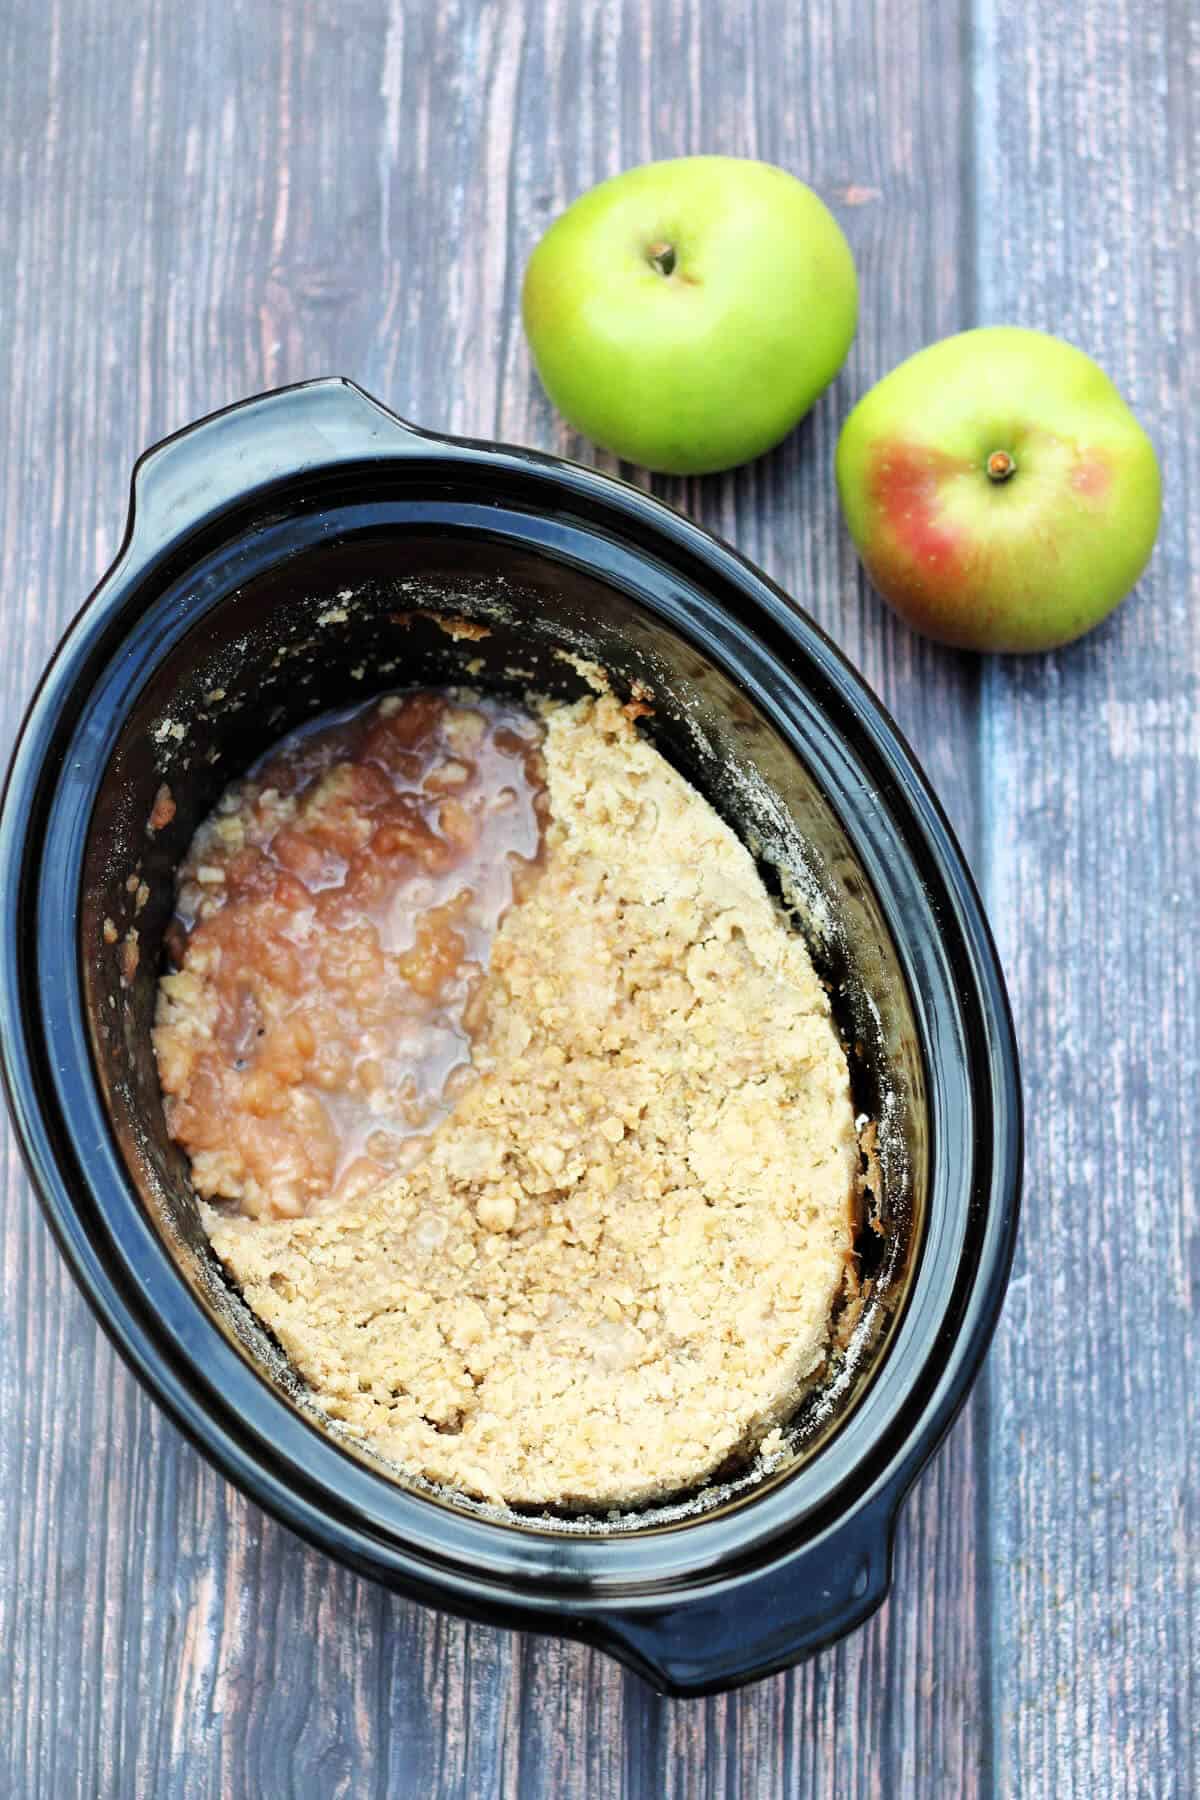 Slow cooker pot with apple crumble, apples behind.